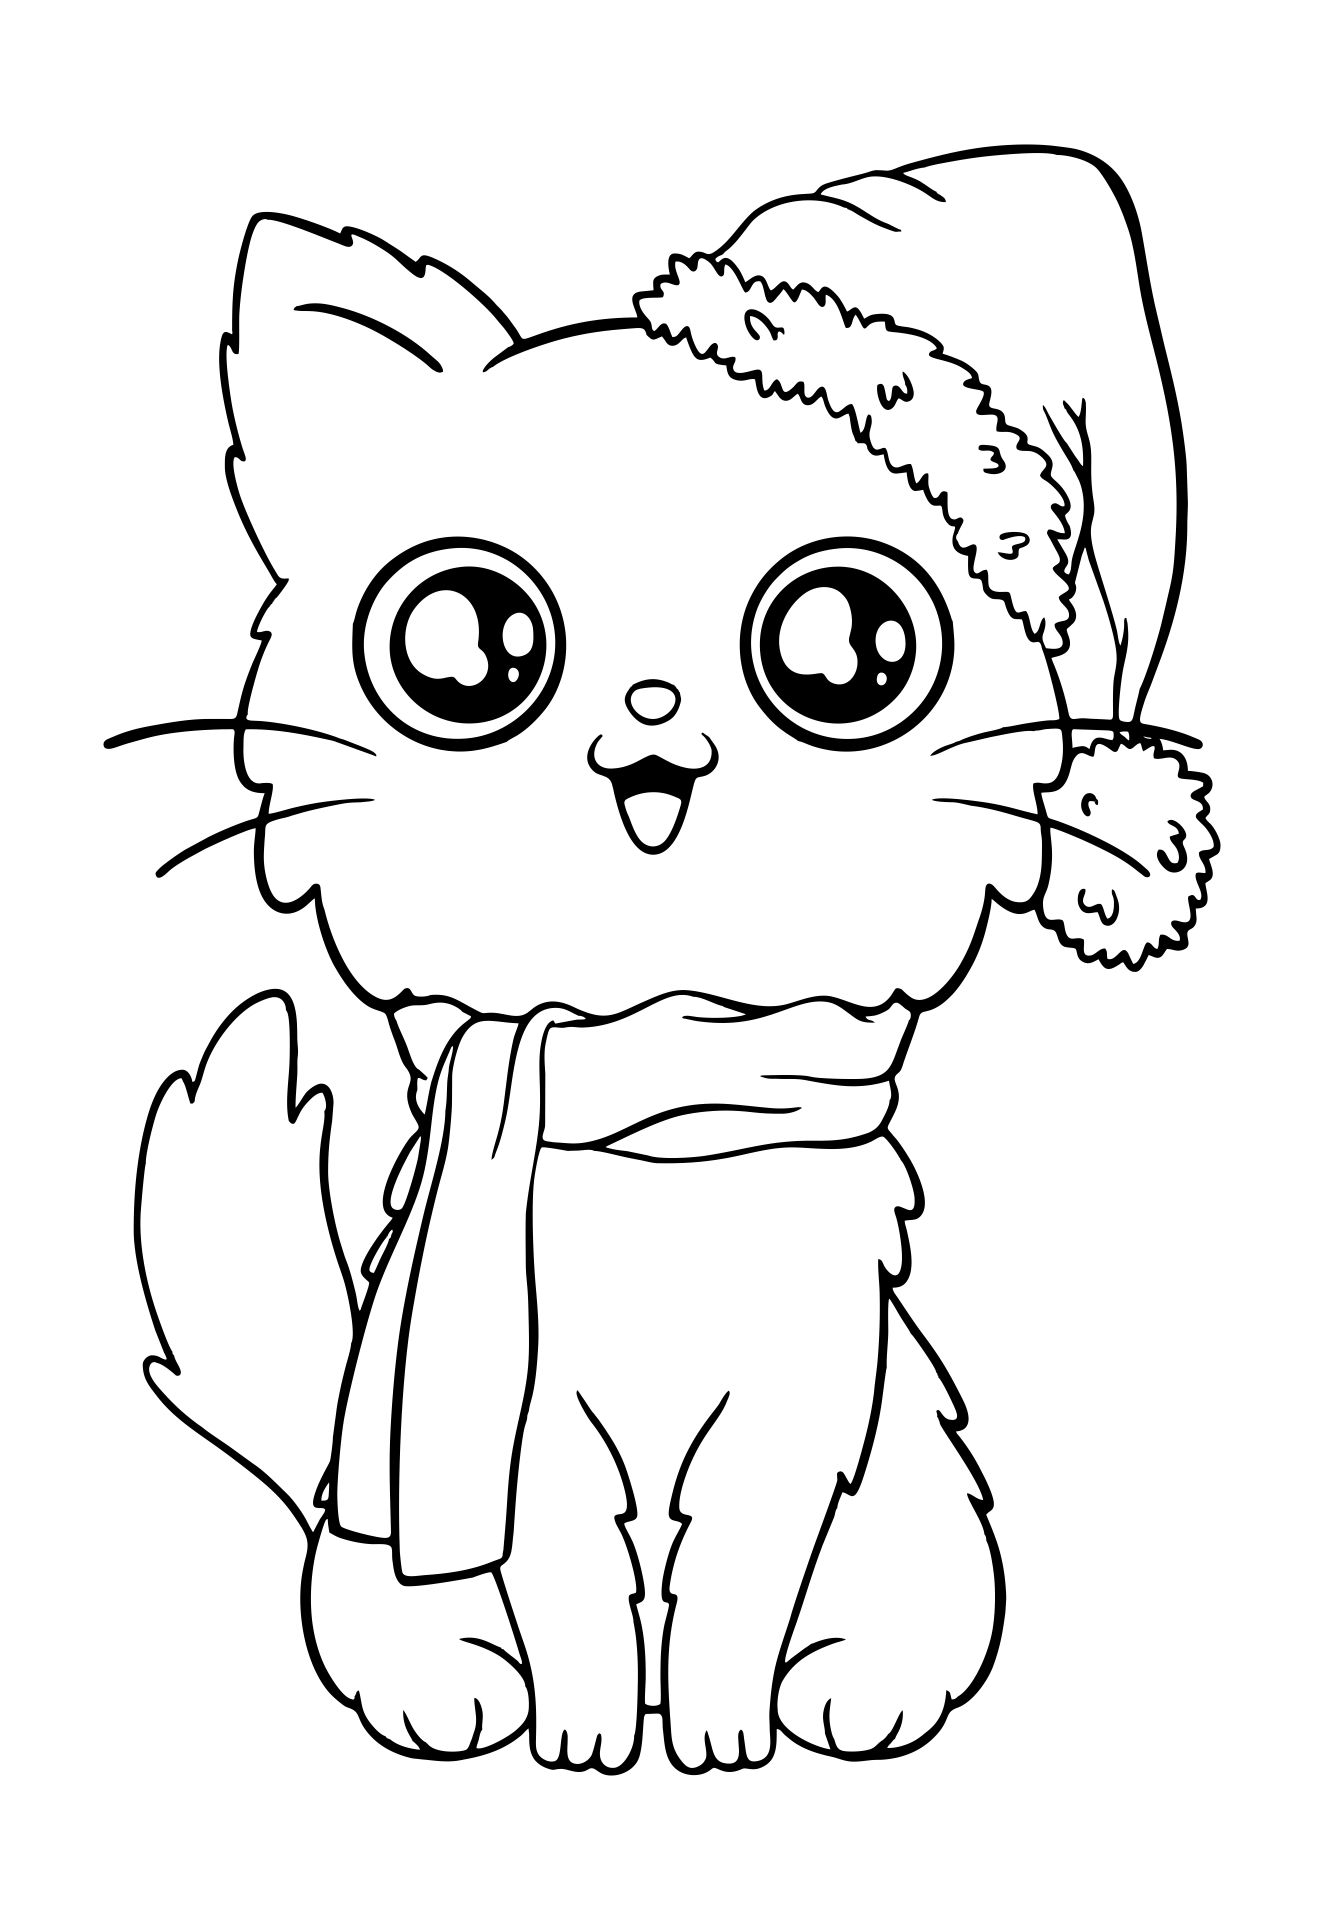 Printable Simple Christmas Kitten Coloring Pages